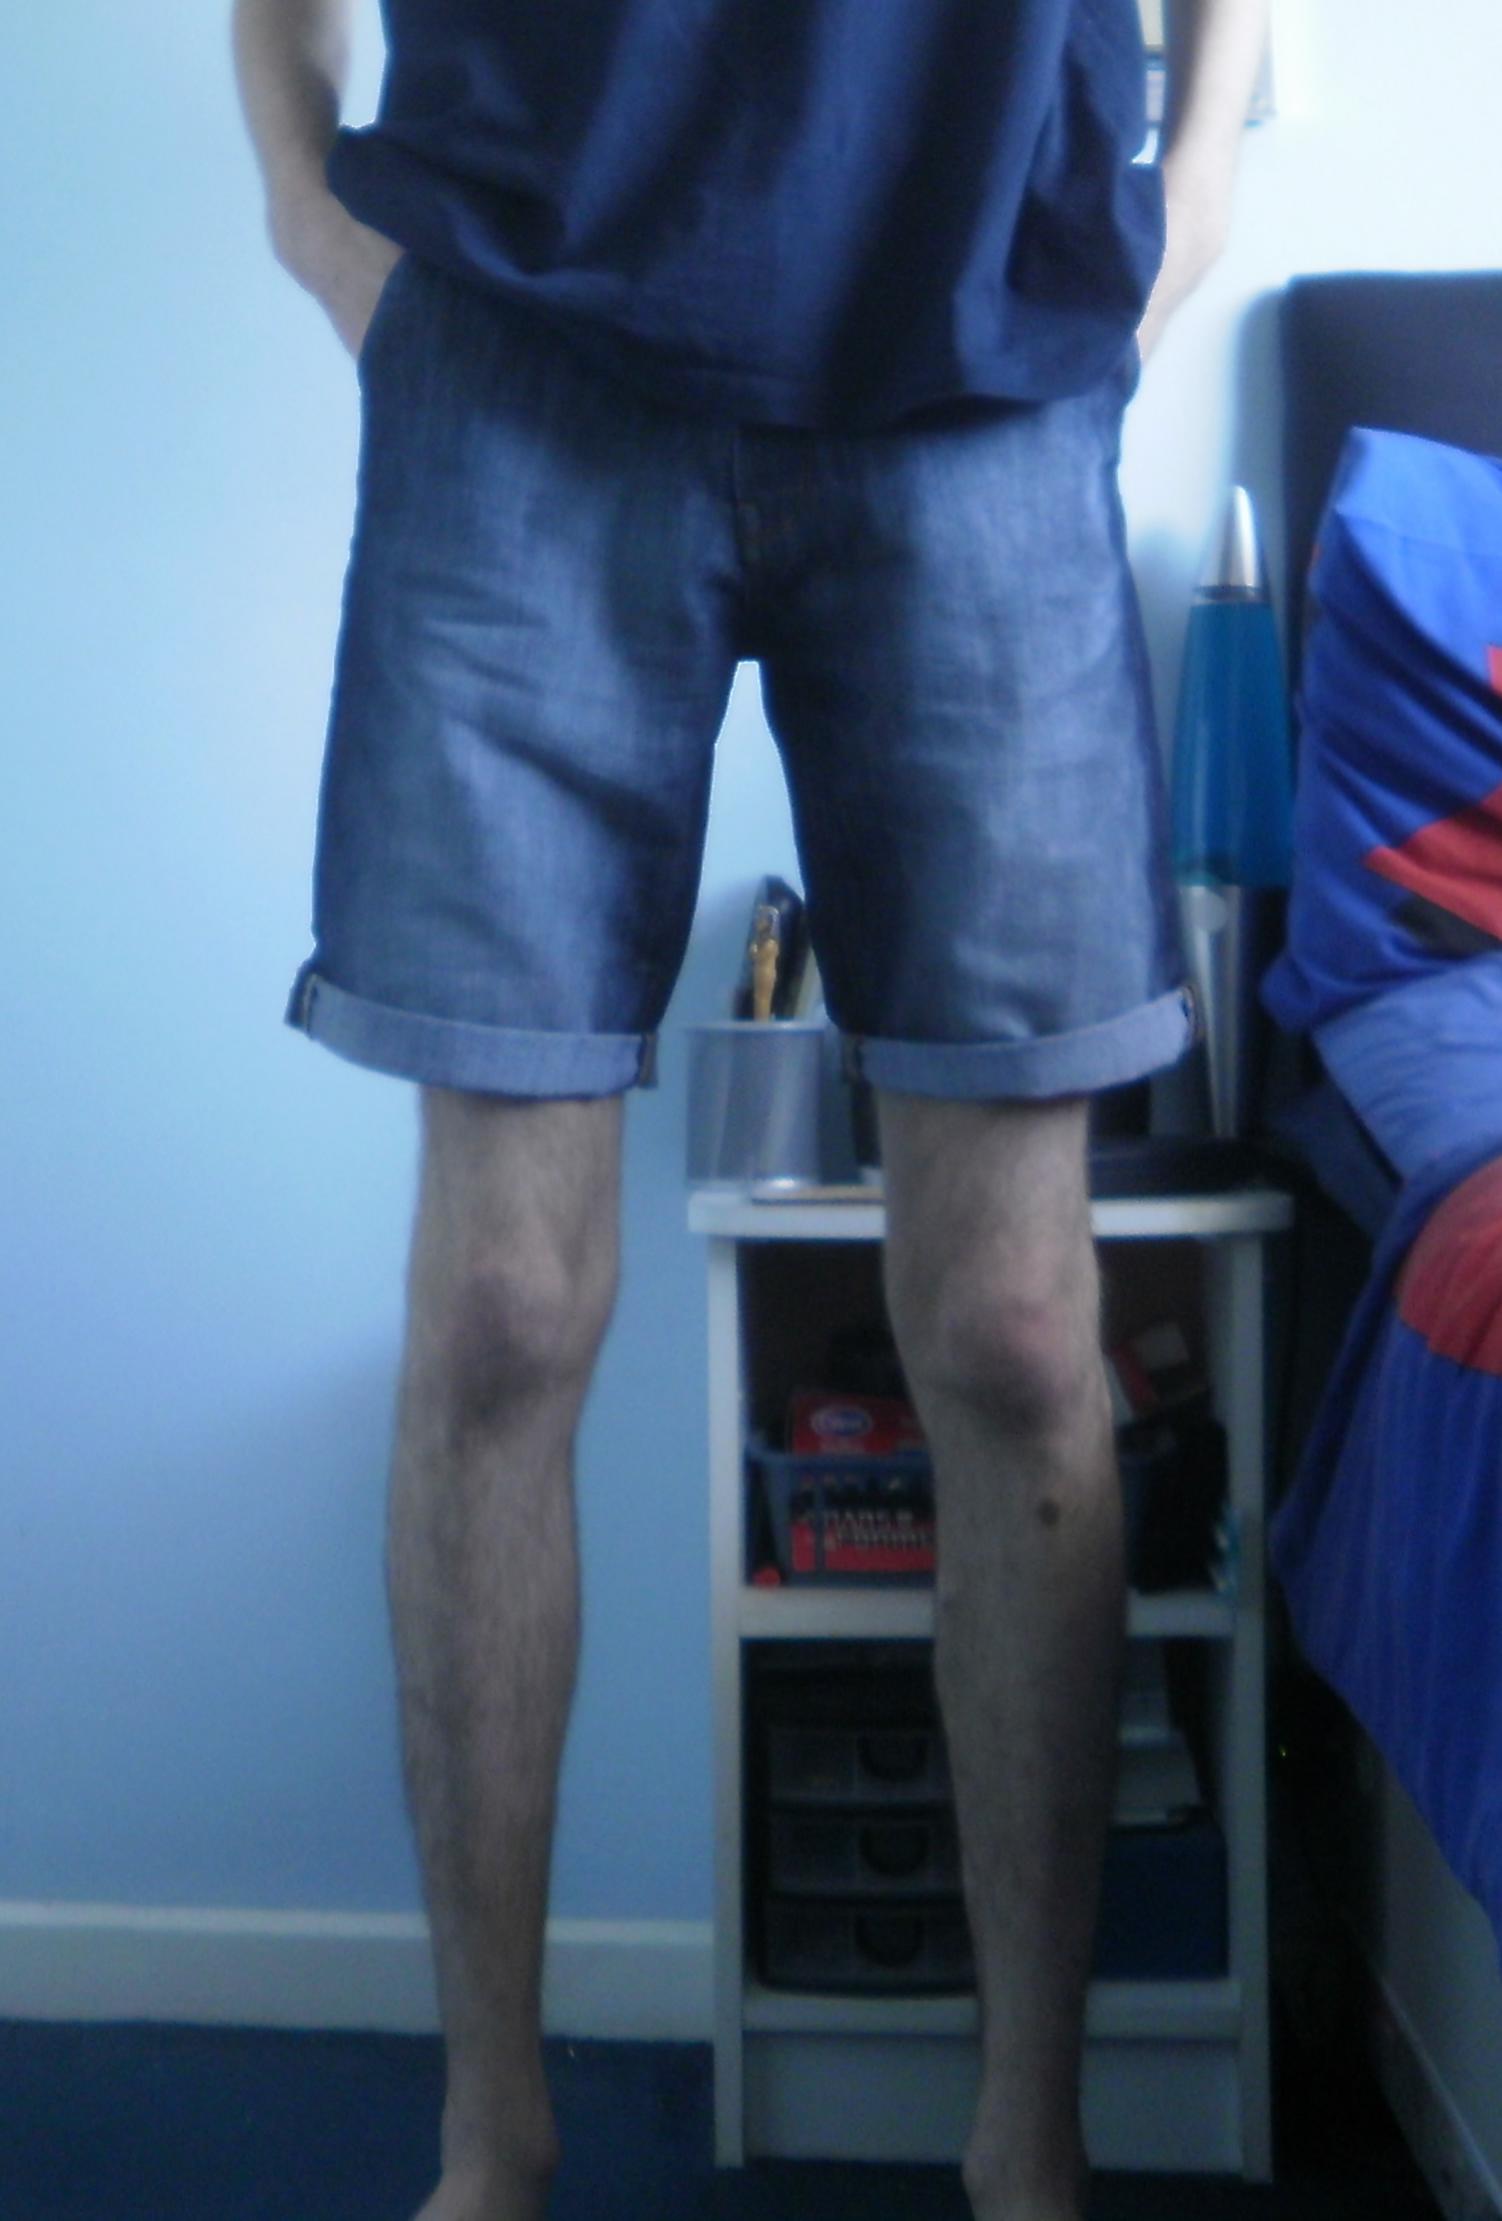 Are my (male) legs too skinny for shorts? - The Student Room